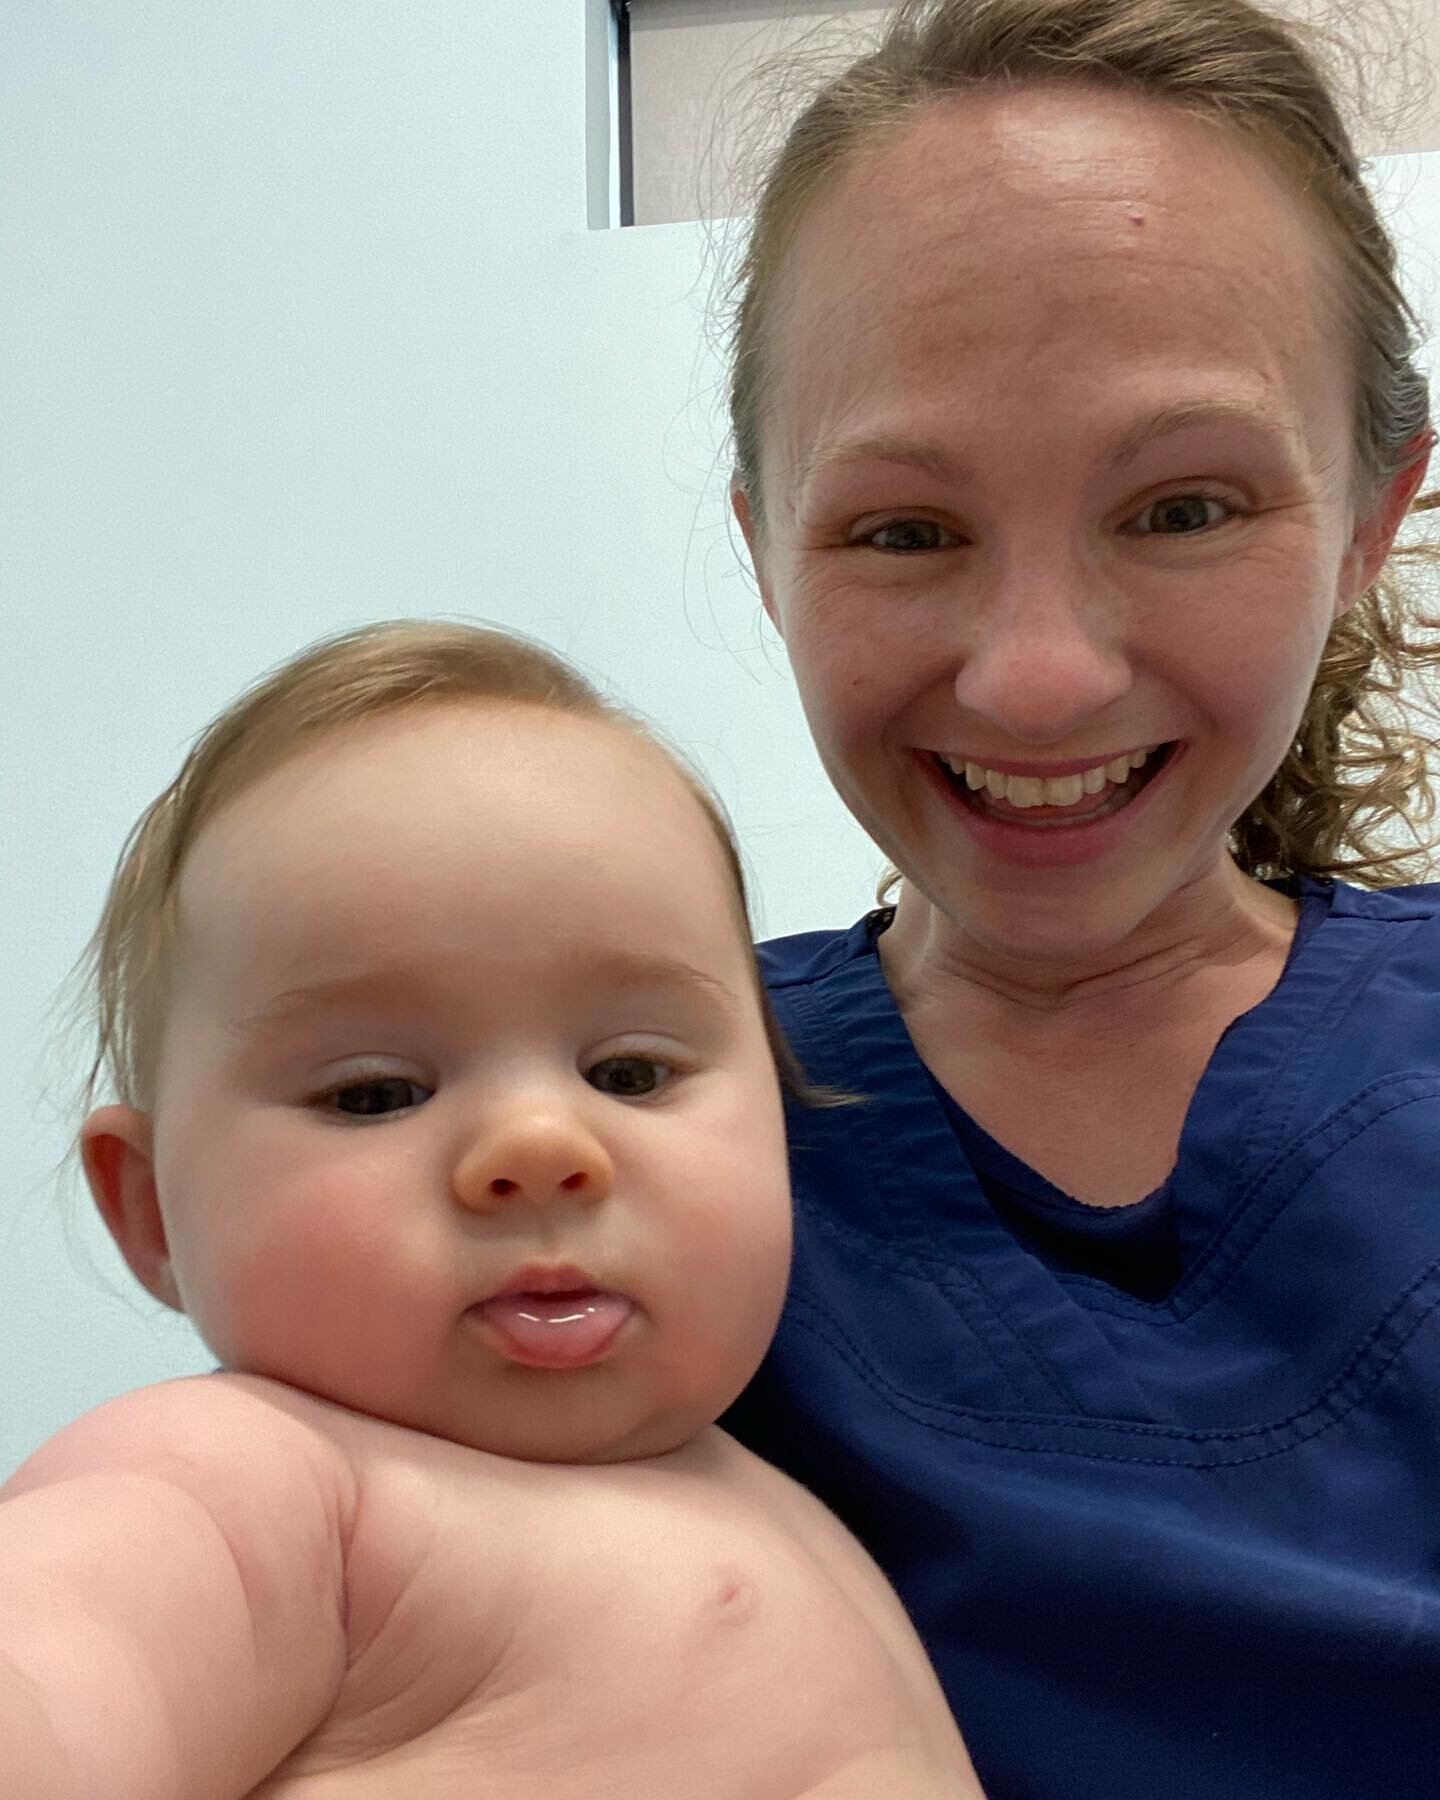 Did you get your little love via a Cesarean birth too? If you are looking to improve your scar flexibility, check out this YouTube video I made! https://youtu.be/eTWkE0PgdSU #cesareanscar #cesareanscarmassage #csectionrecovery #csectionmama #knoxvill